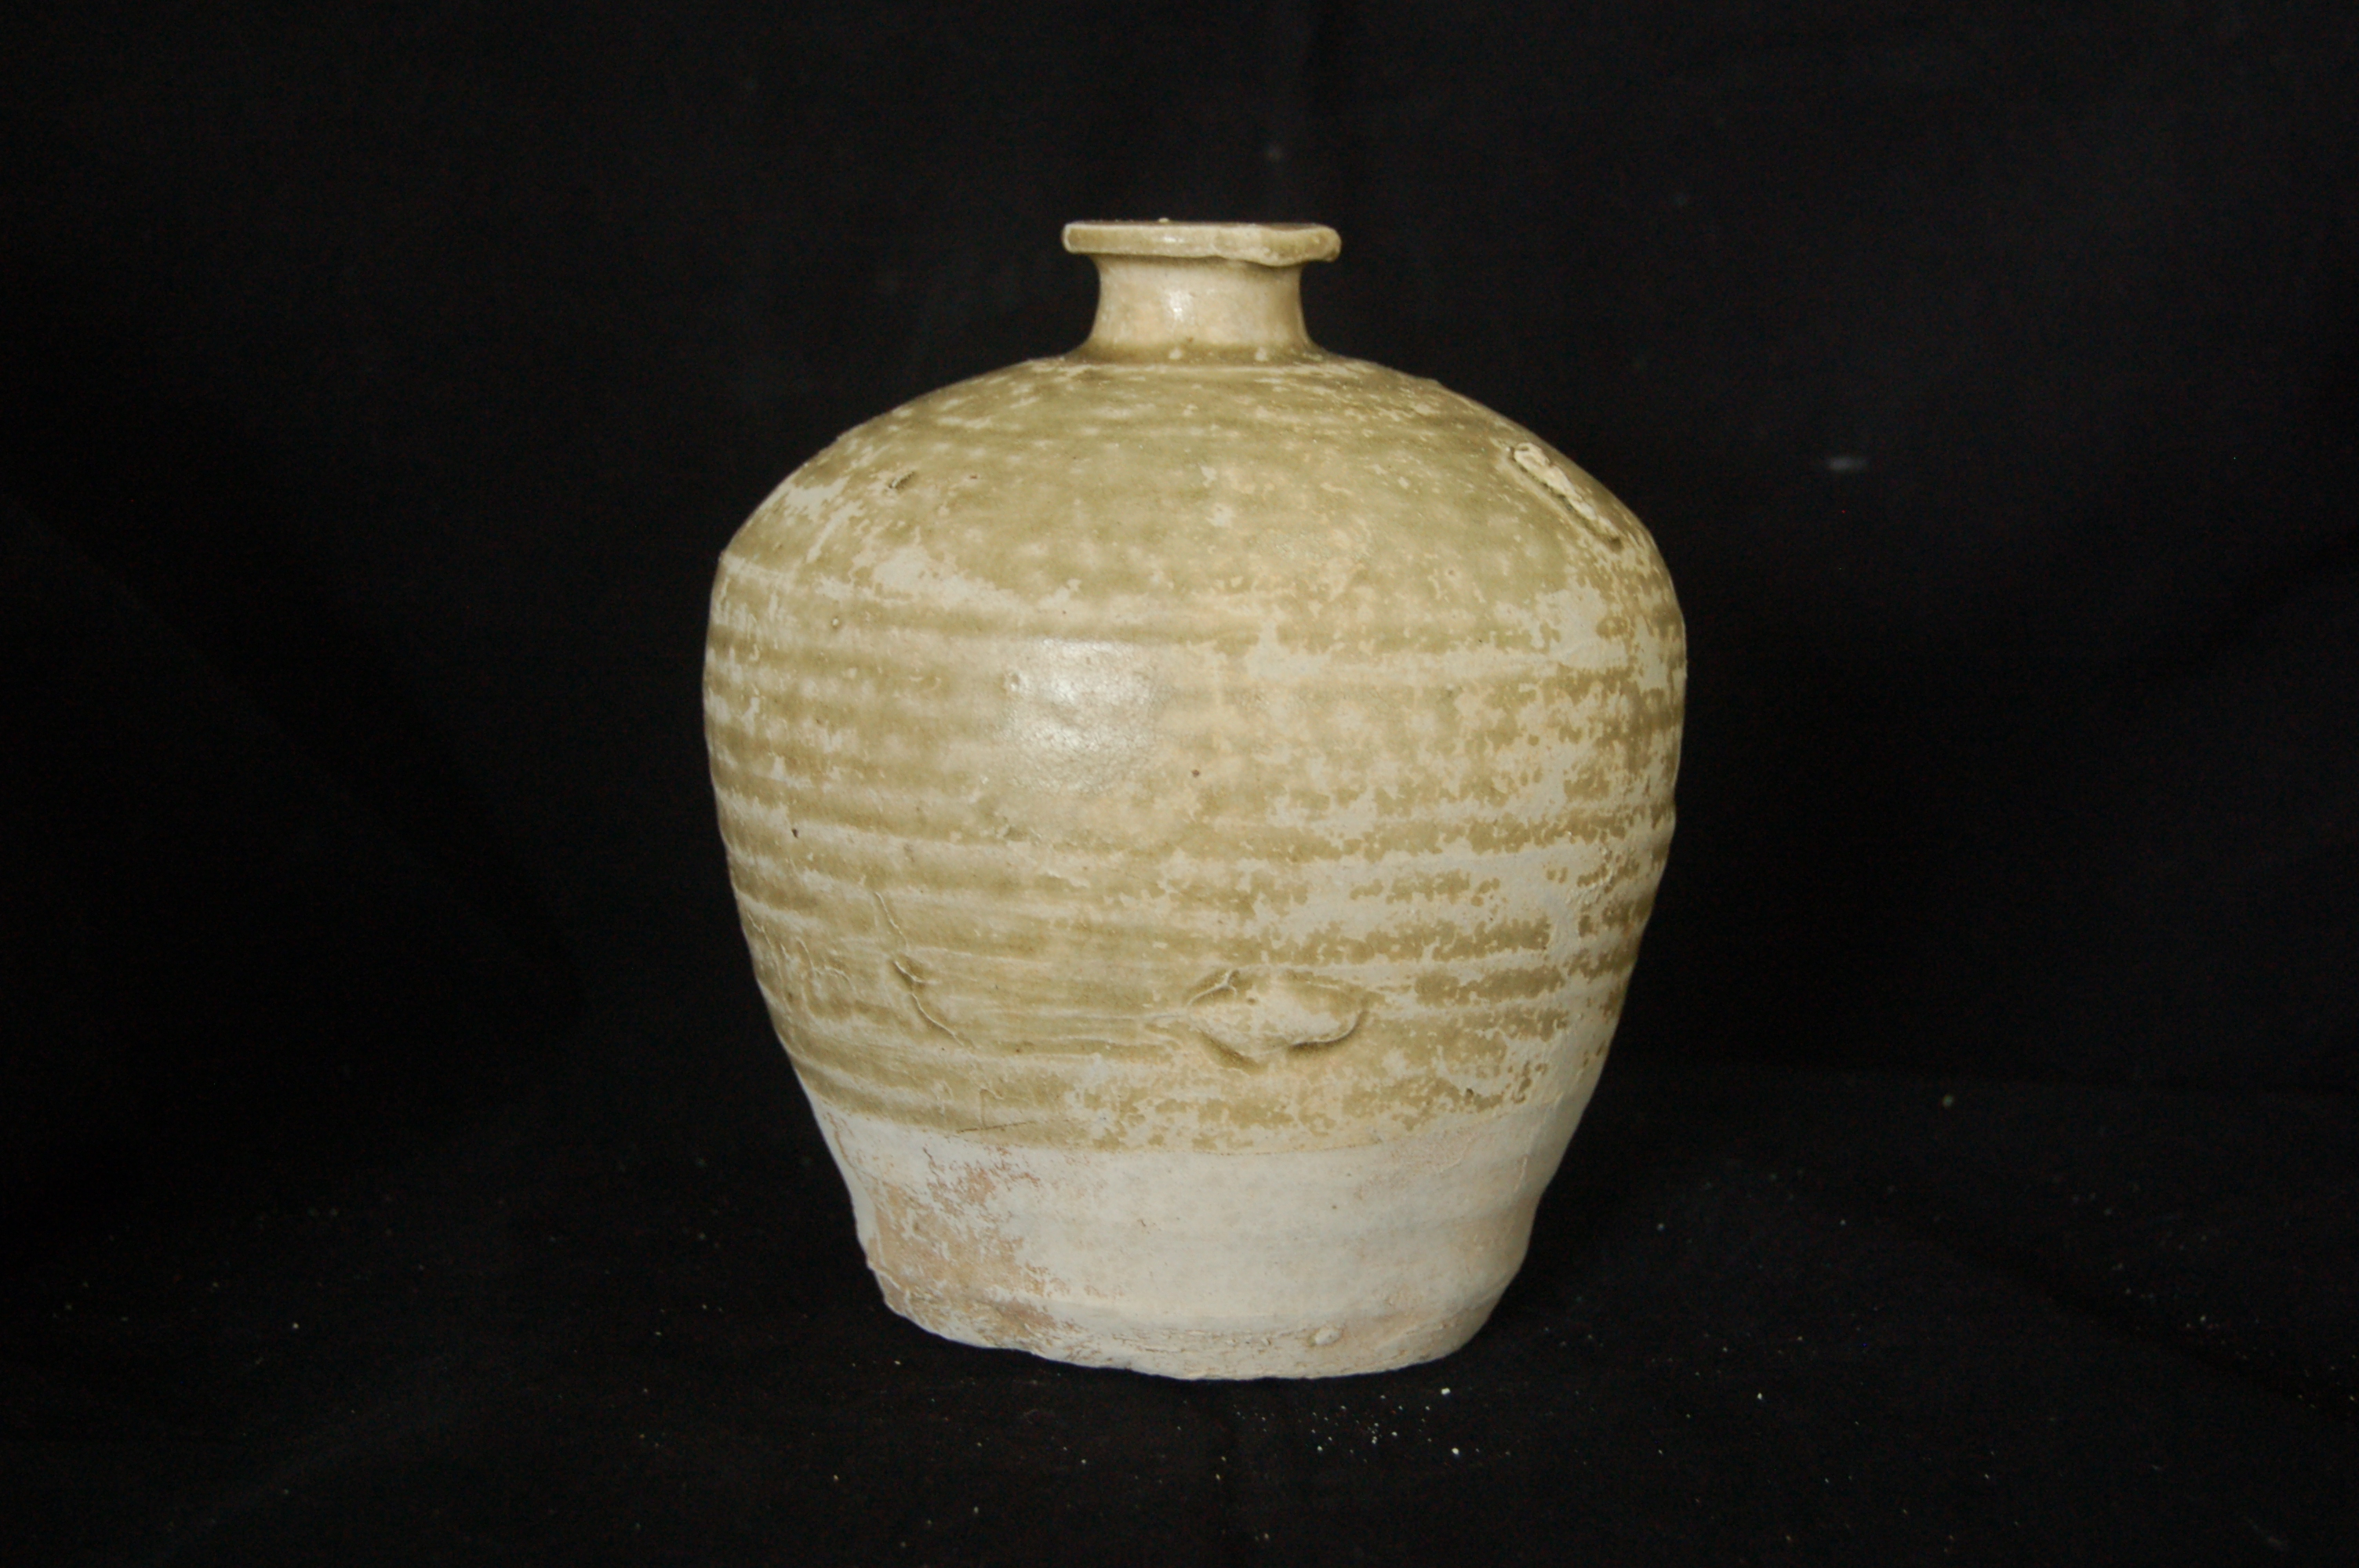 Small-mouth jar with olive green glaze stopping short of the flat base. Short neck with flared mouth-rim. Diameter 13.5 cm, height 15 cm.